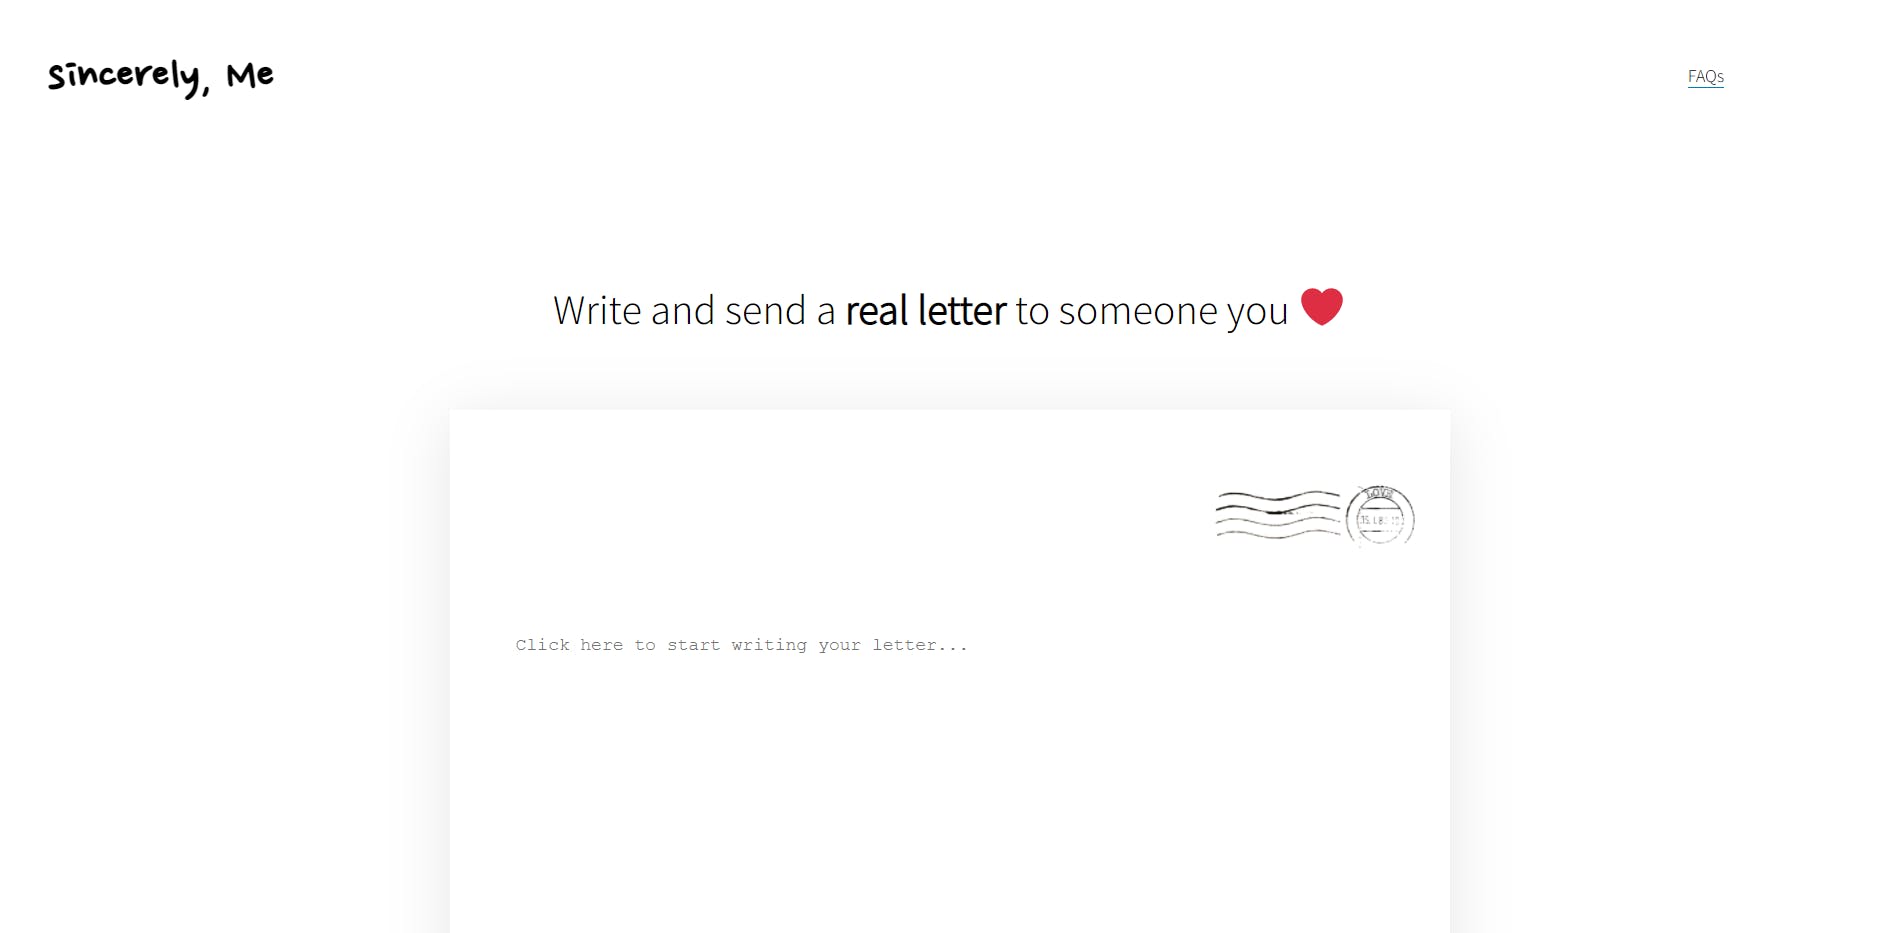 Sincerely, Me - Write and send a real letter to someone you love